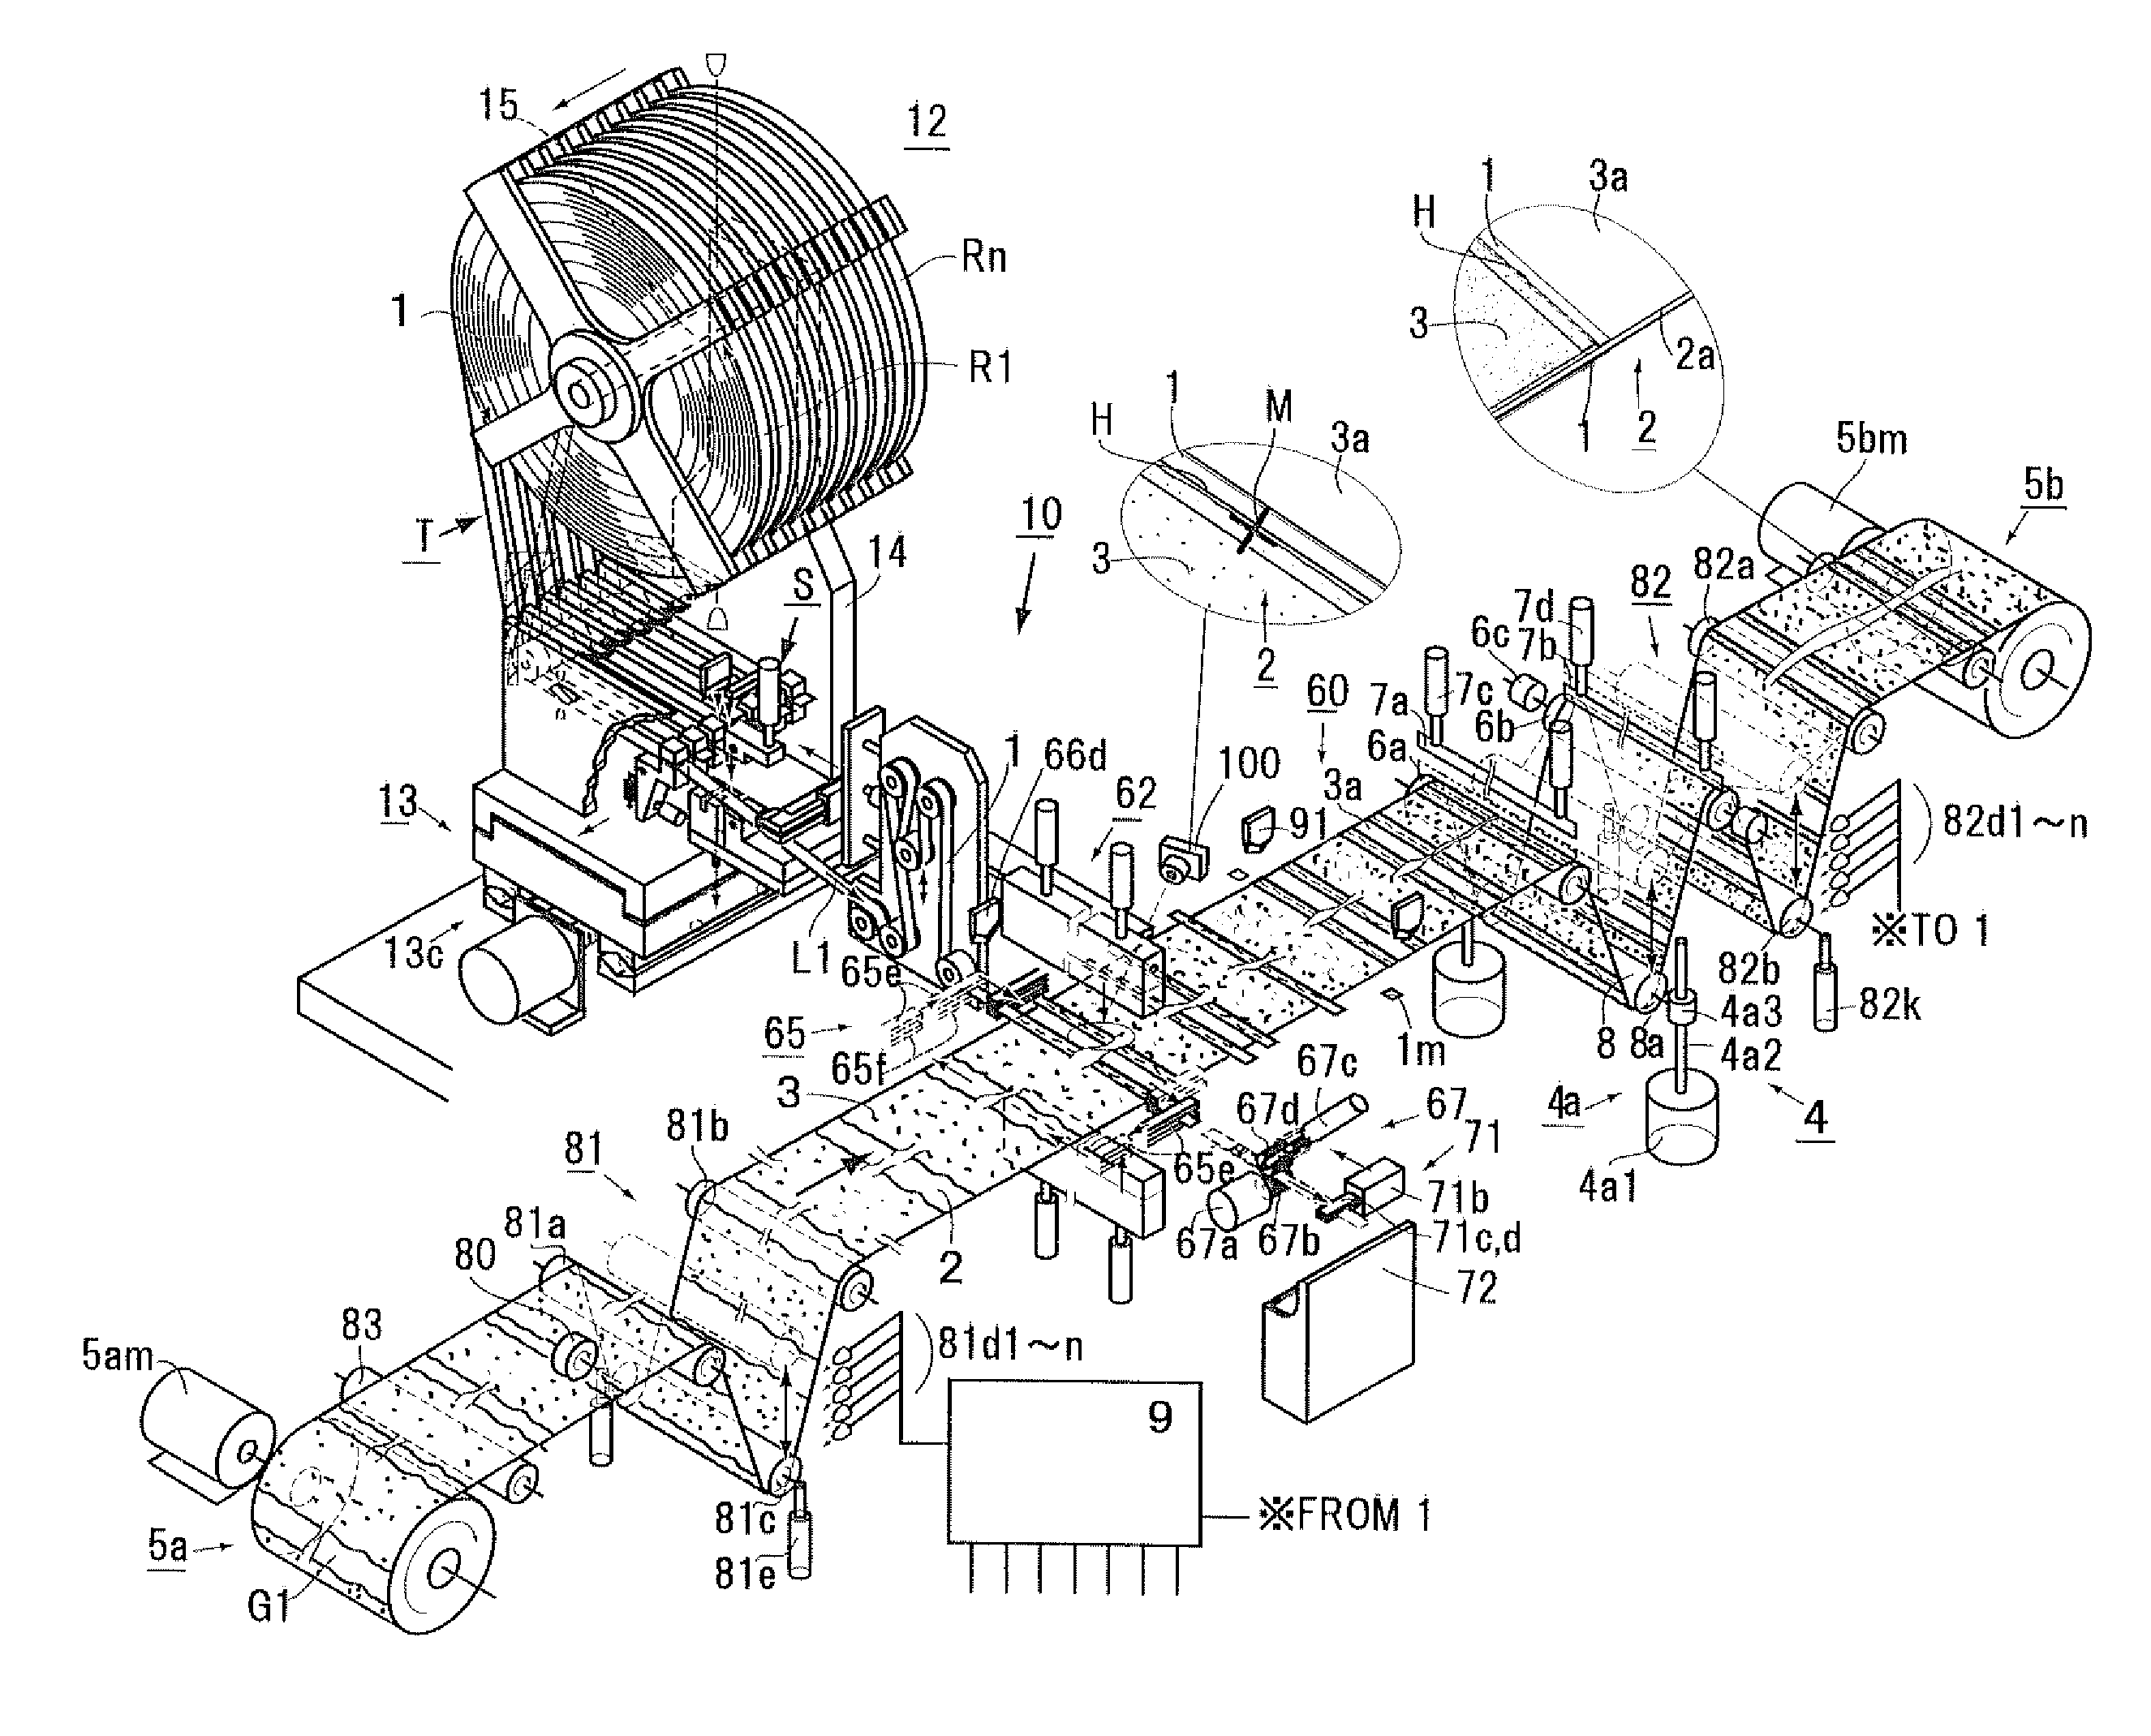 Original fabric pitch feed mechanism of original fabric manufacturing device for electrochemical element